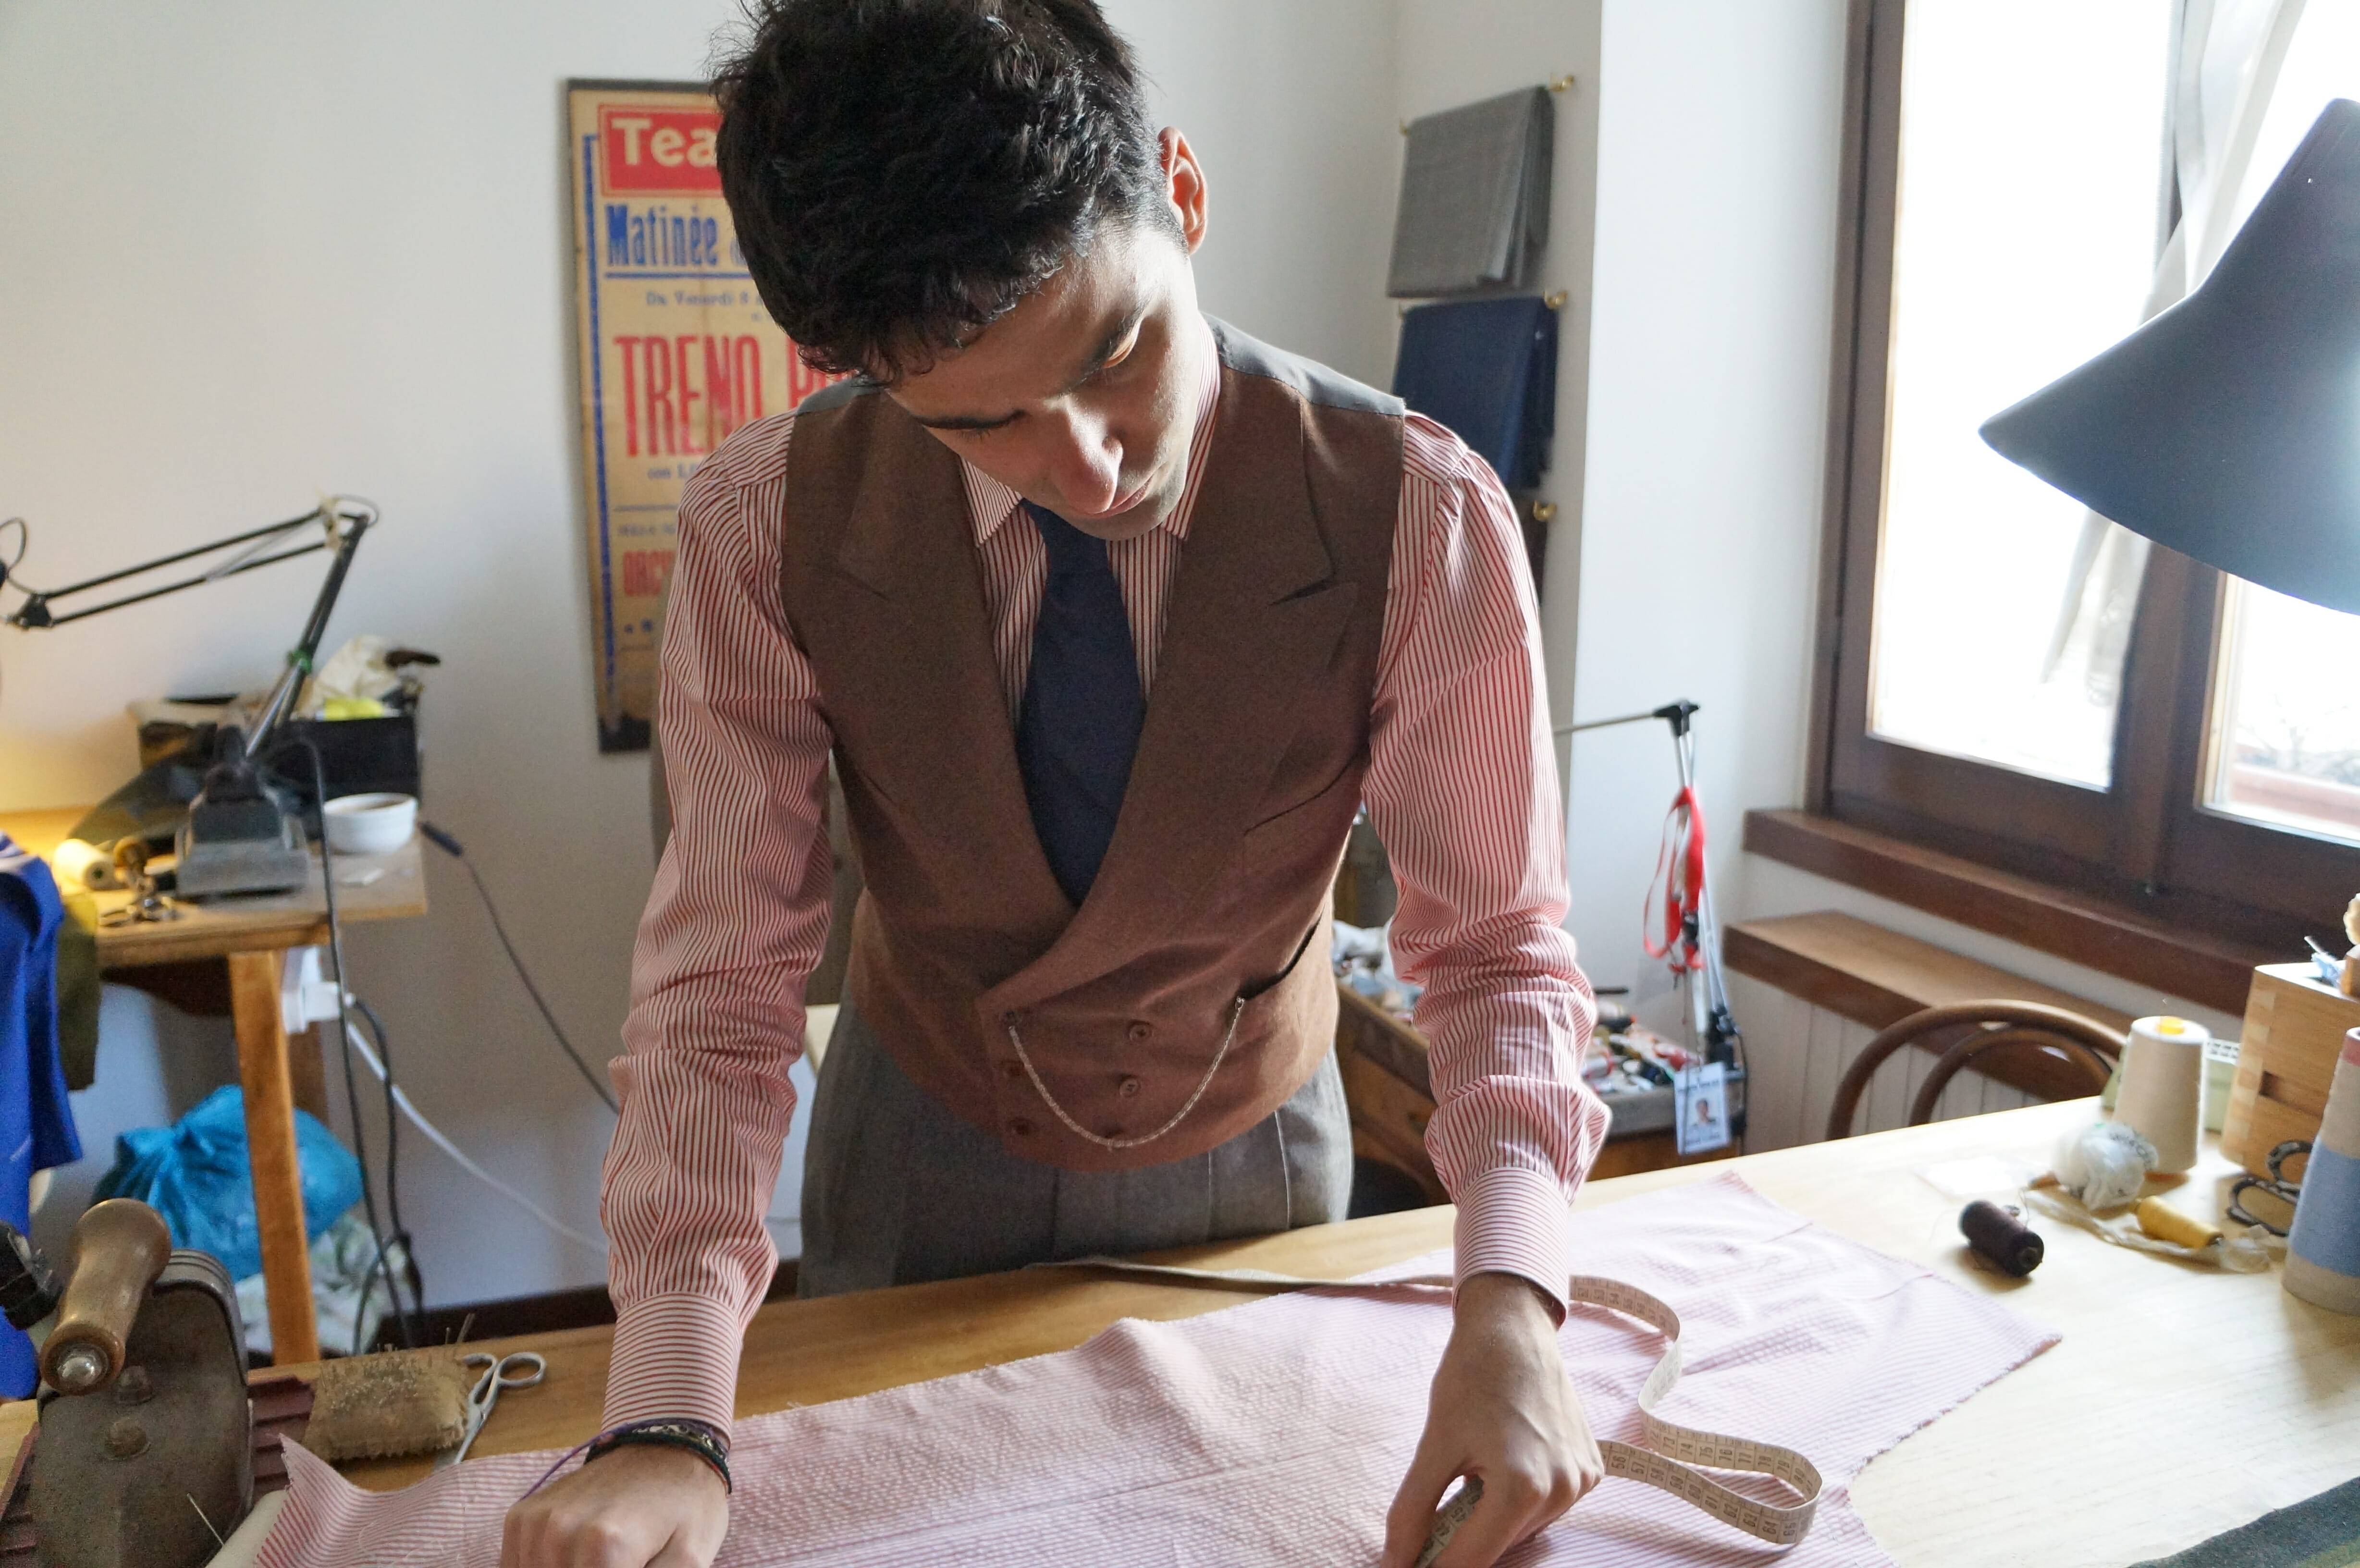 Gianfrancesco Musella at work in the atelier of Musella Dembech.